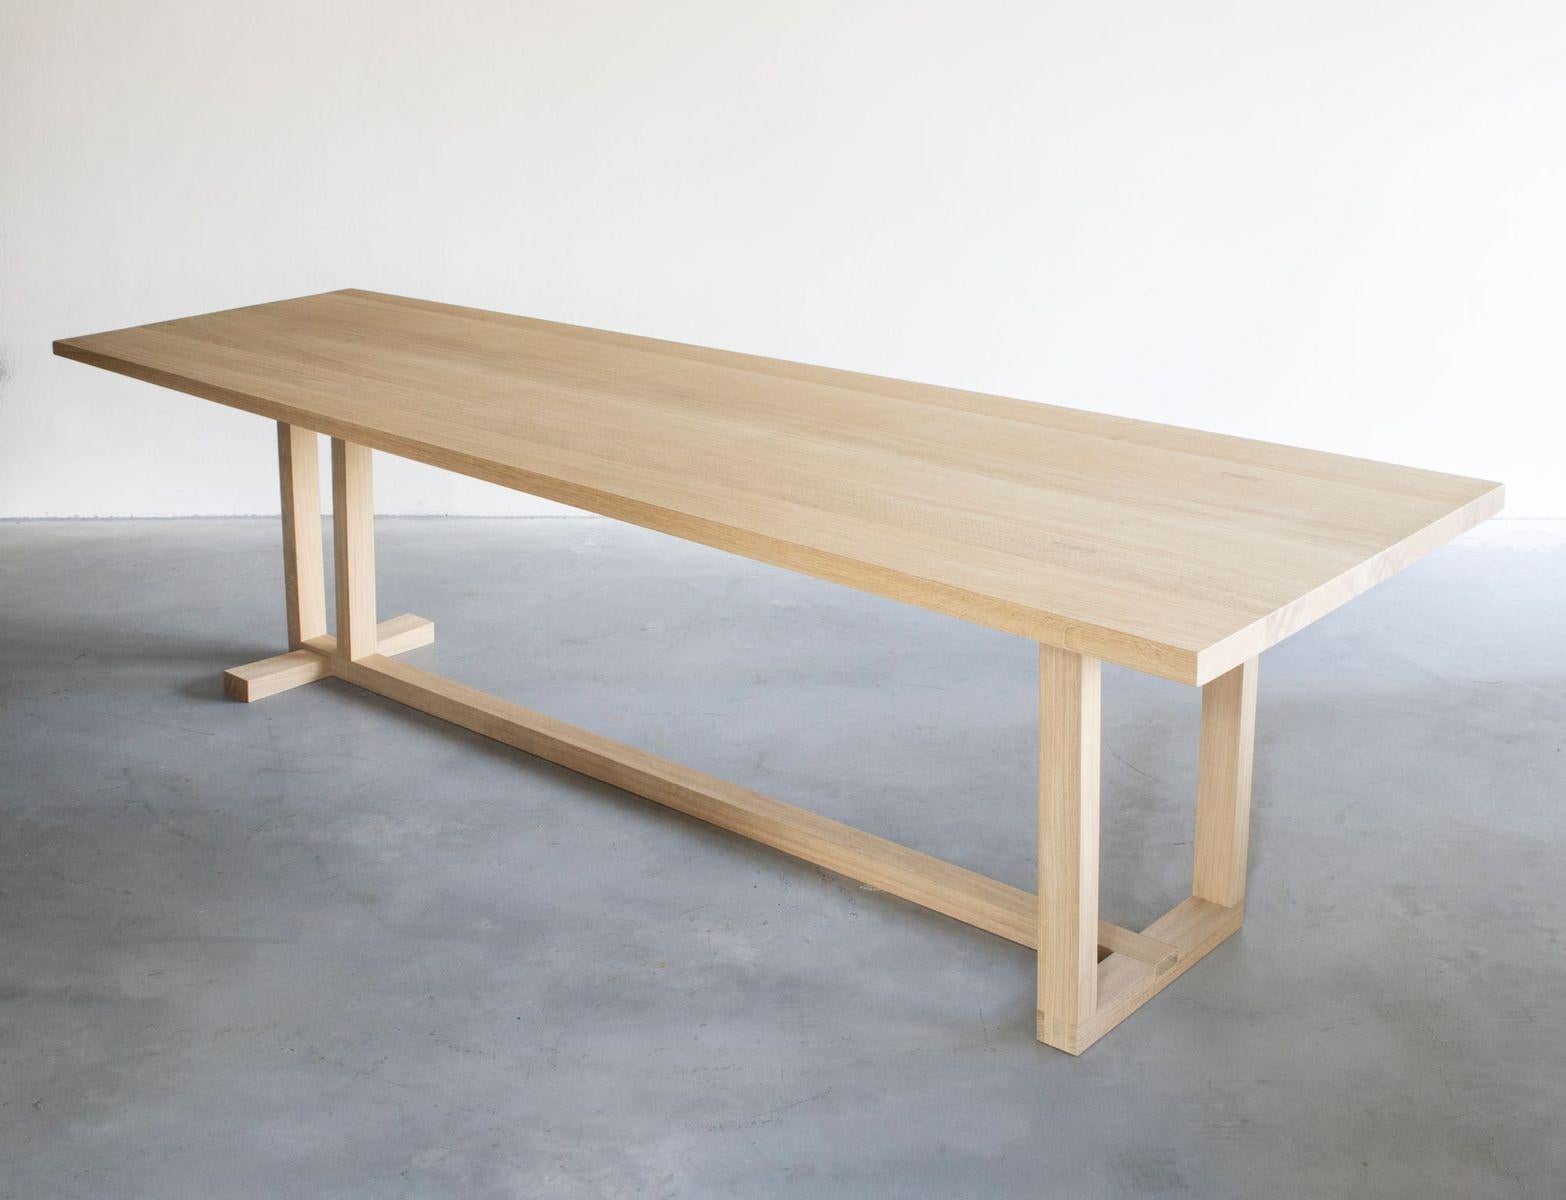 Wedge dining table by Van Rossum
Dimensions: D280 x W100 x H75 cm
Materials: Oak.

The wood is available in all standard Van Rossum colors, or in a matching finish to customer’s own sample. 

“I have tried to create something that is not